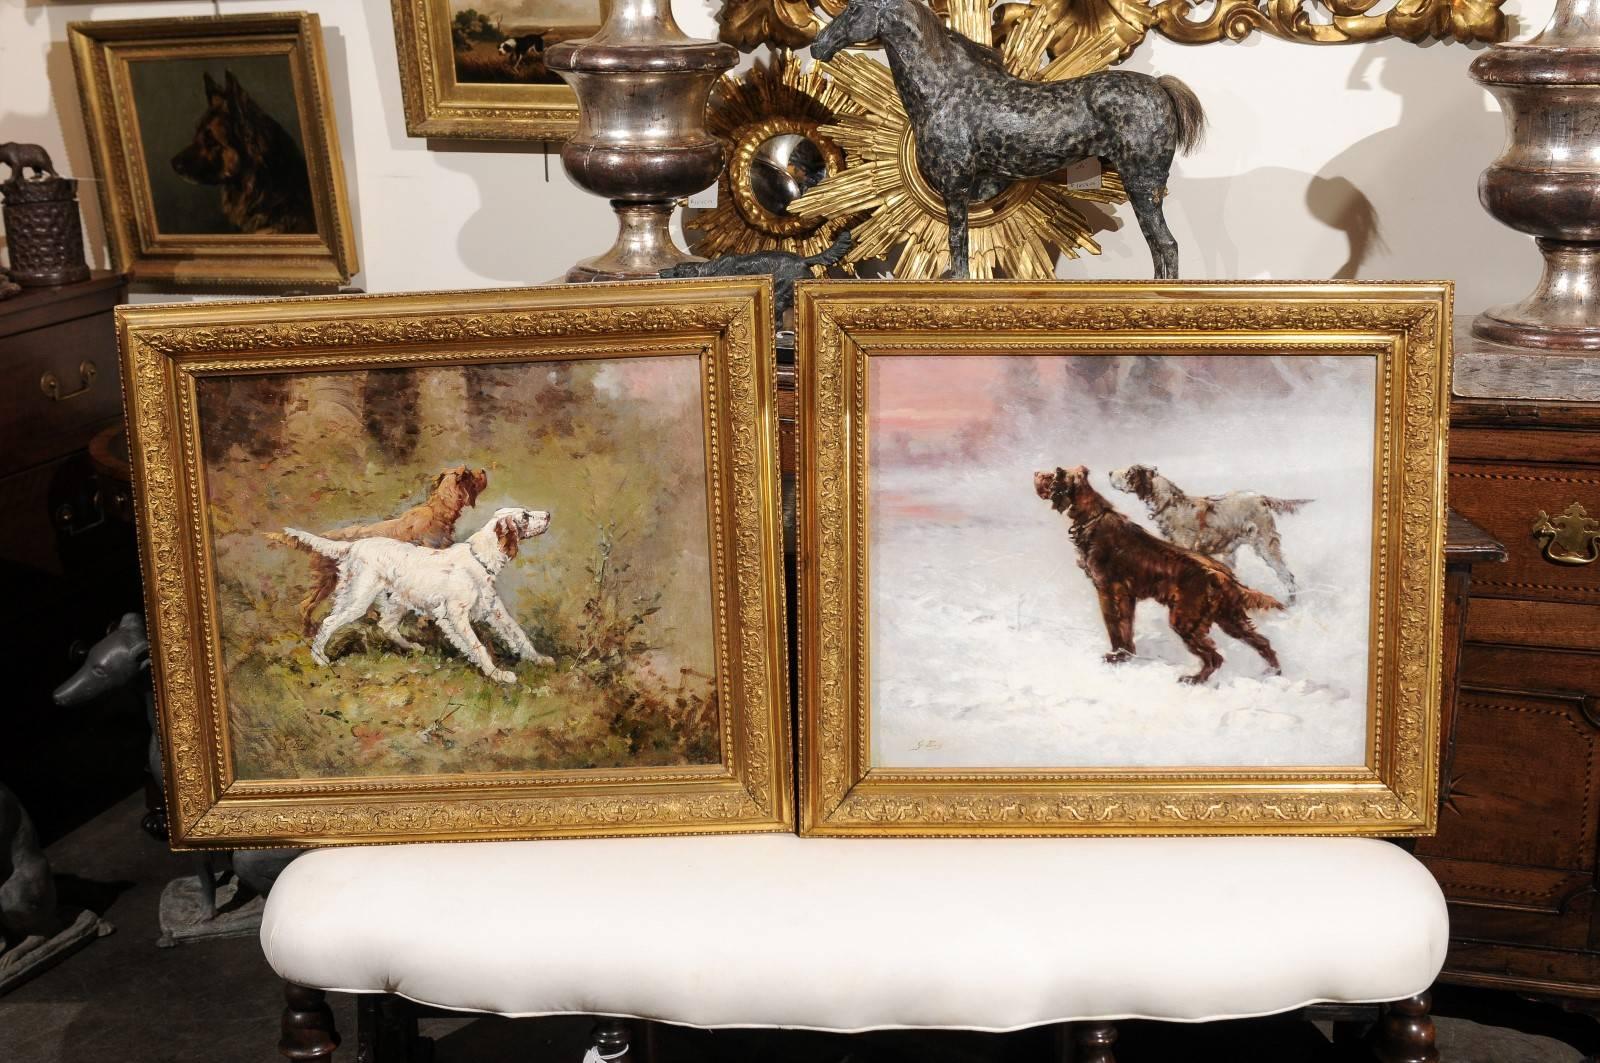 This exquisite pair of French oil paintings from the early 20th century depicts two pairs of sporting dogs set in a giltwood frame and are signed by G. Ben, lower left. Each painting seems to feature a different season. With no doubt, the one on the